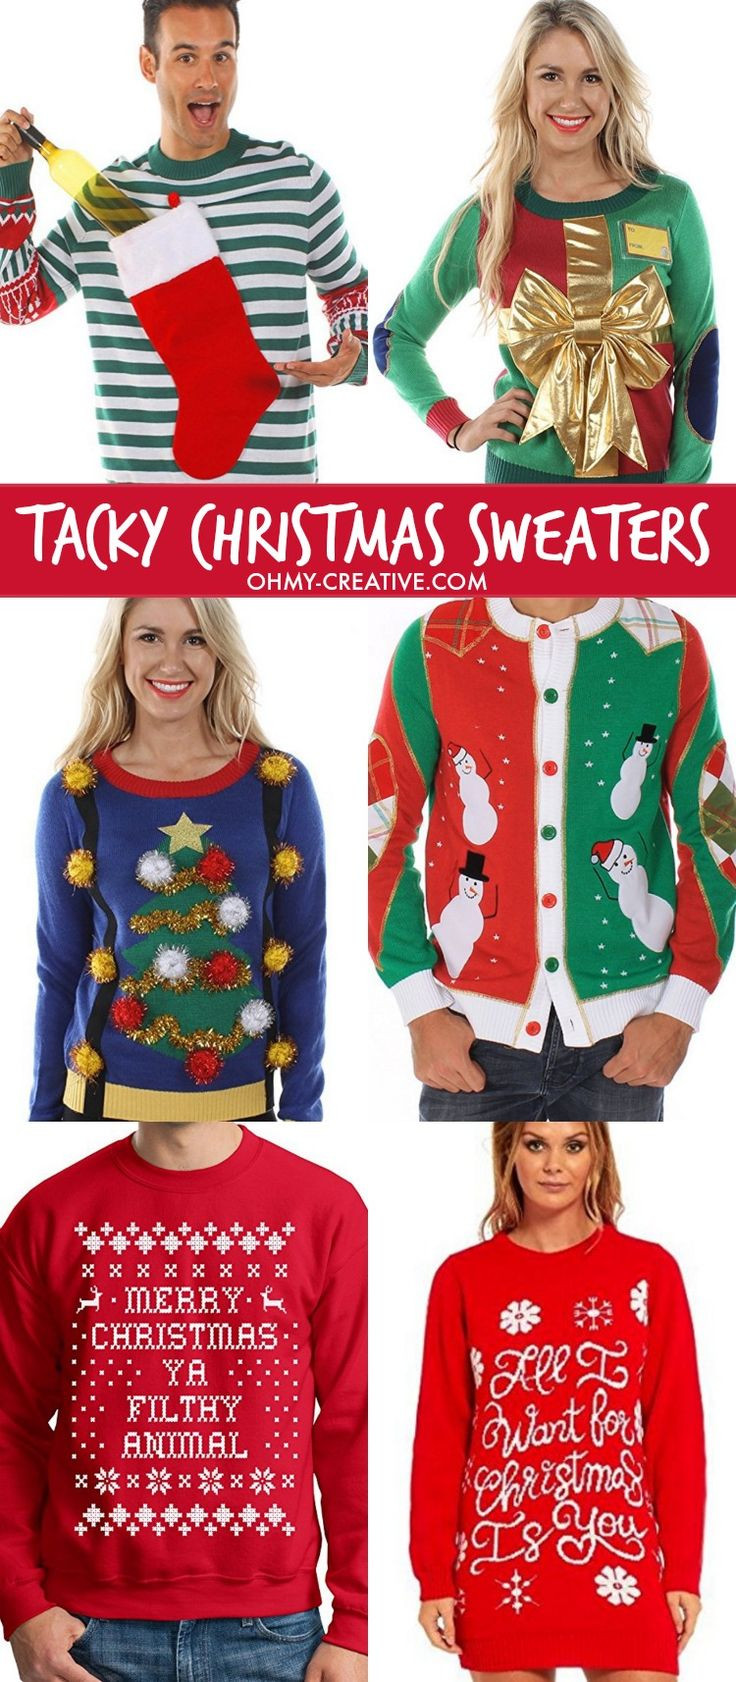 Creative Ugly Christmas Sweater Ideas
 183 best Ugly Christmas Sweater Party Ideas images on